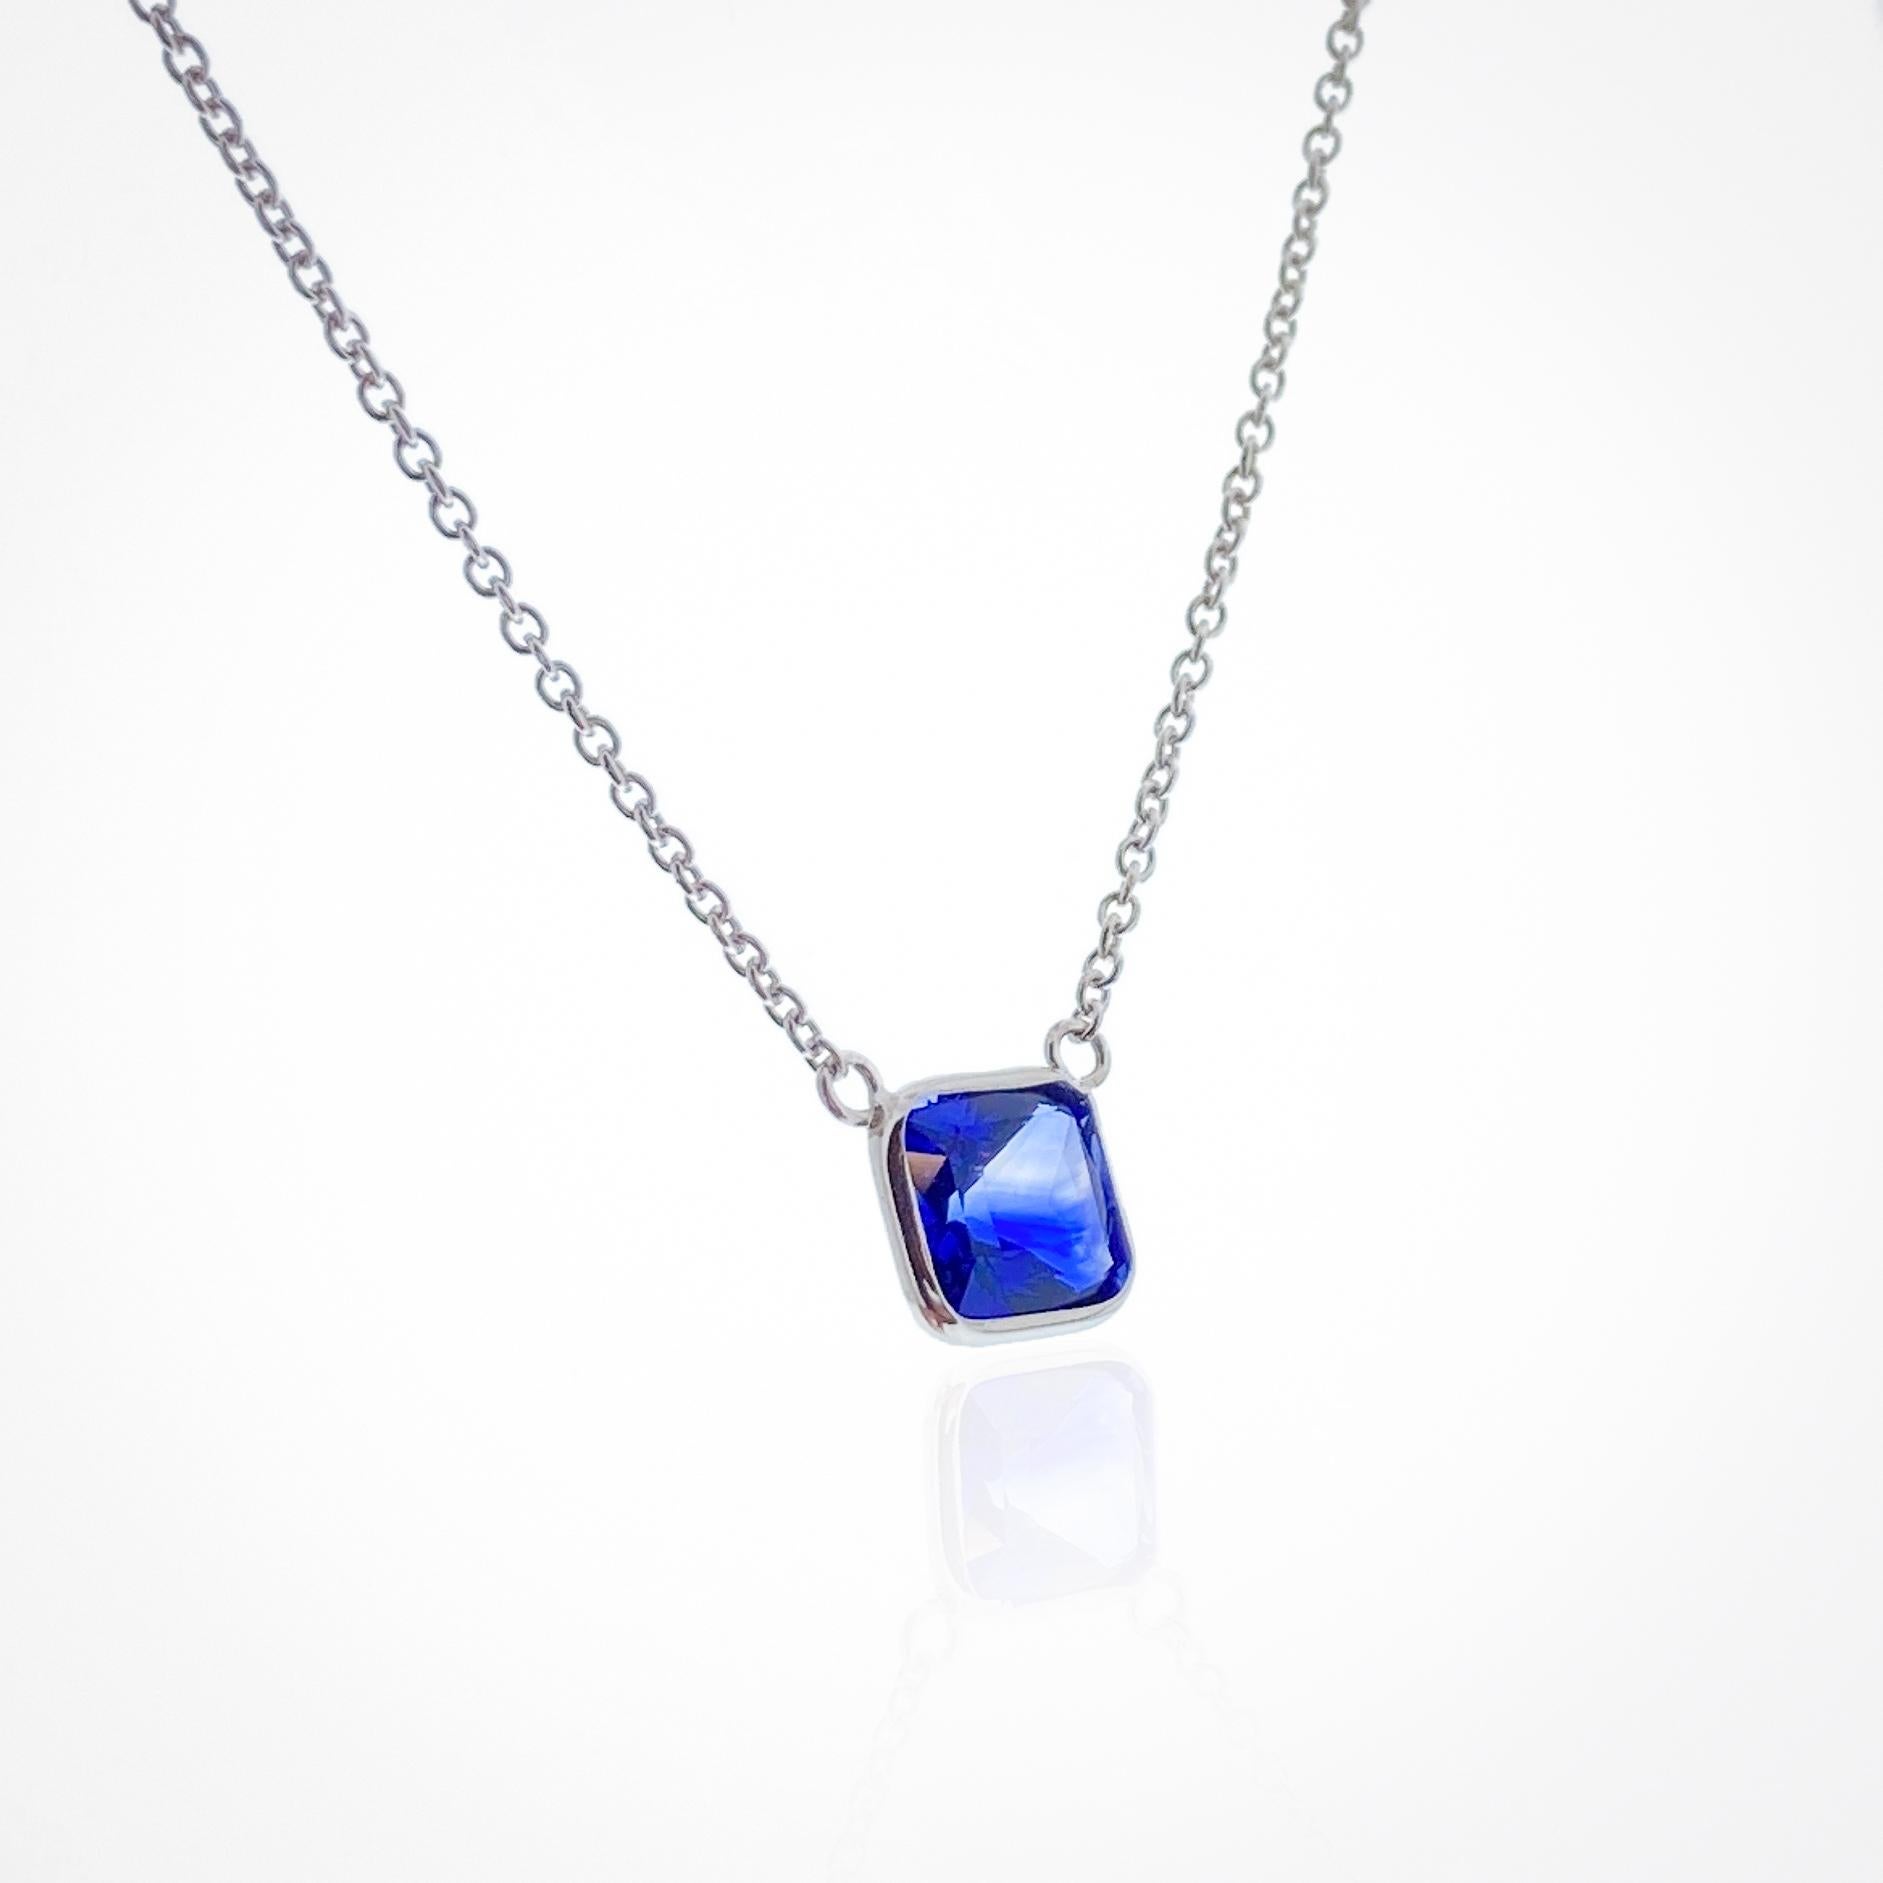 This necklace features an octagonal-cut (often referred to as 